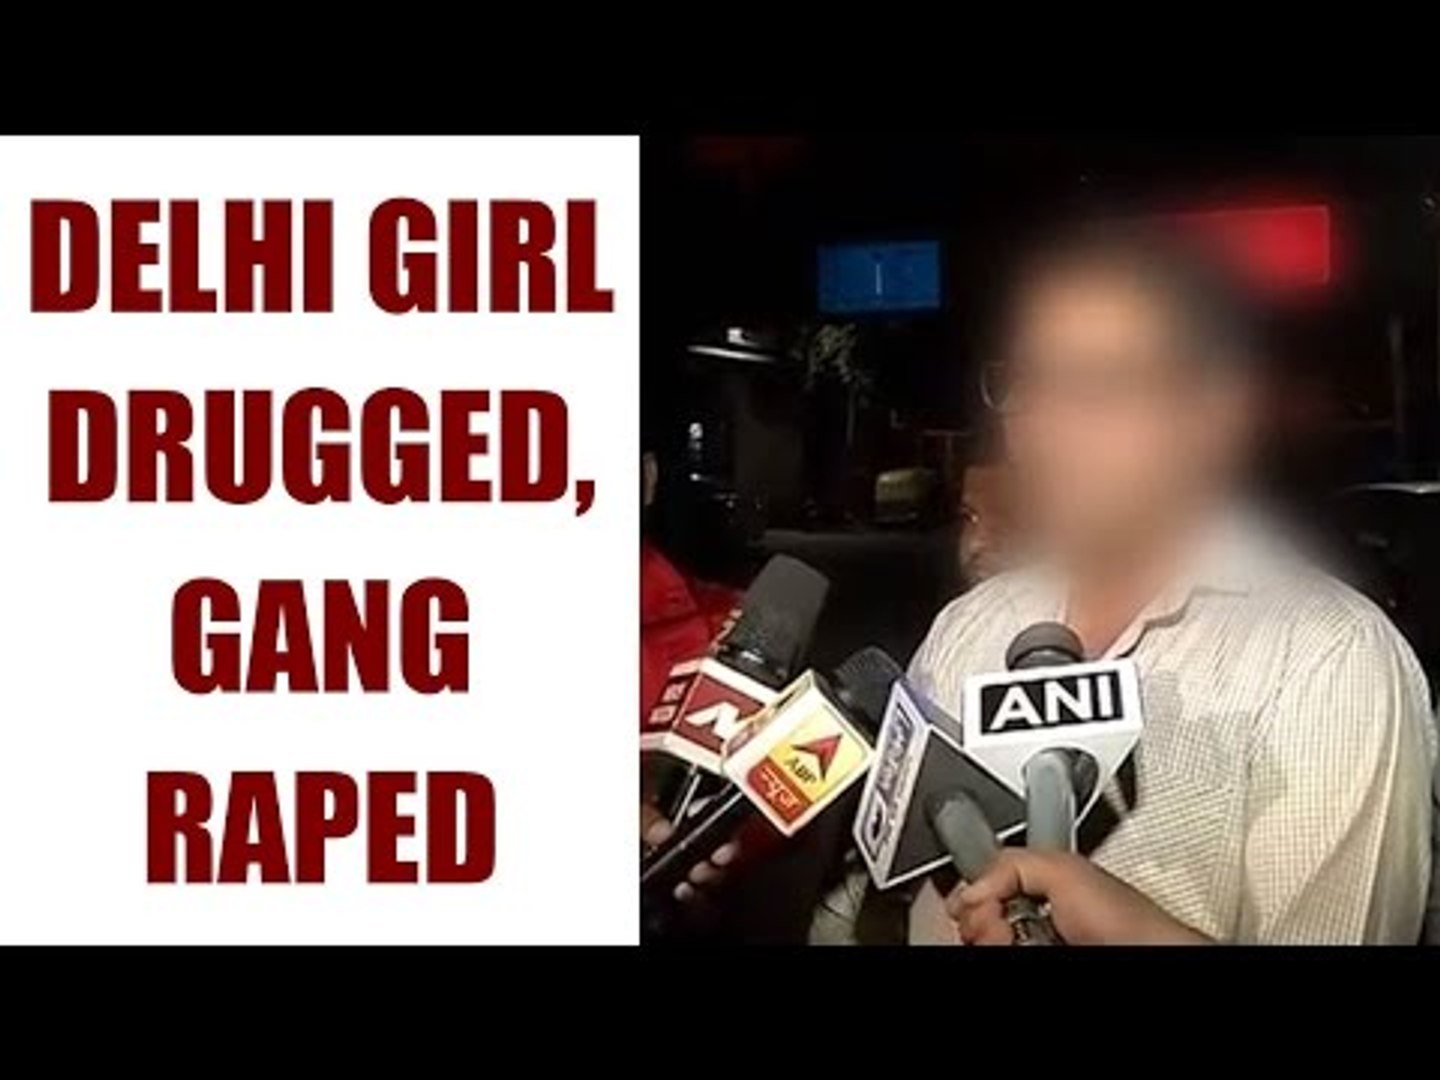 Delhis 15-year-old girl drugged, gang-raped Watch video Oneindia News  image